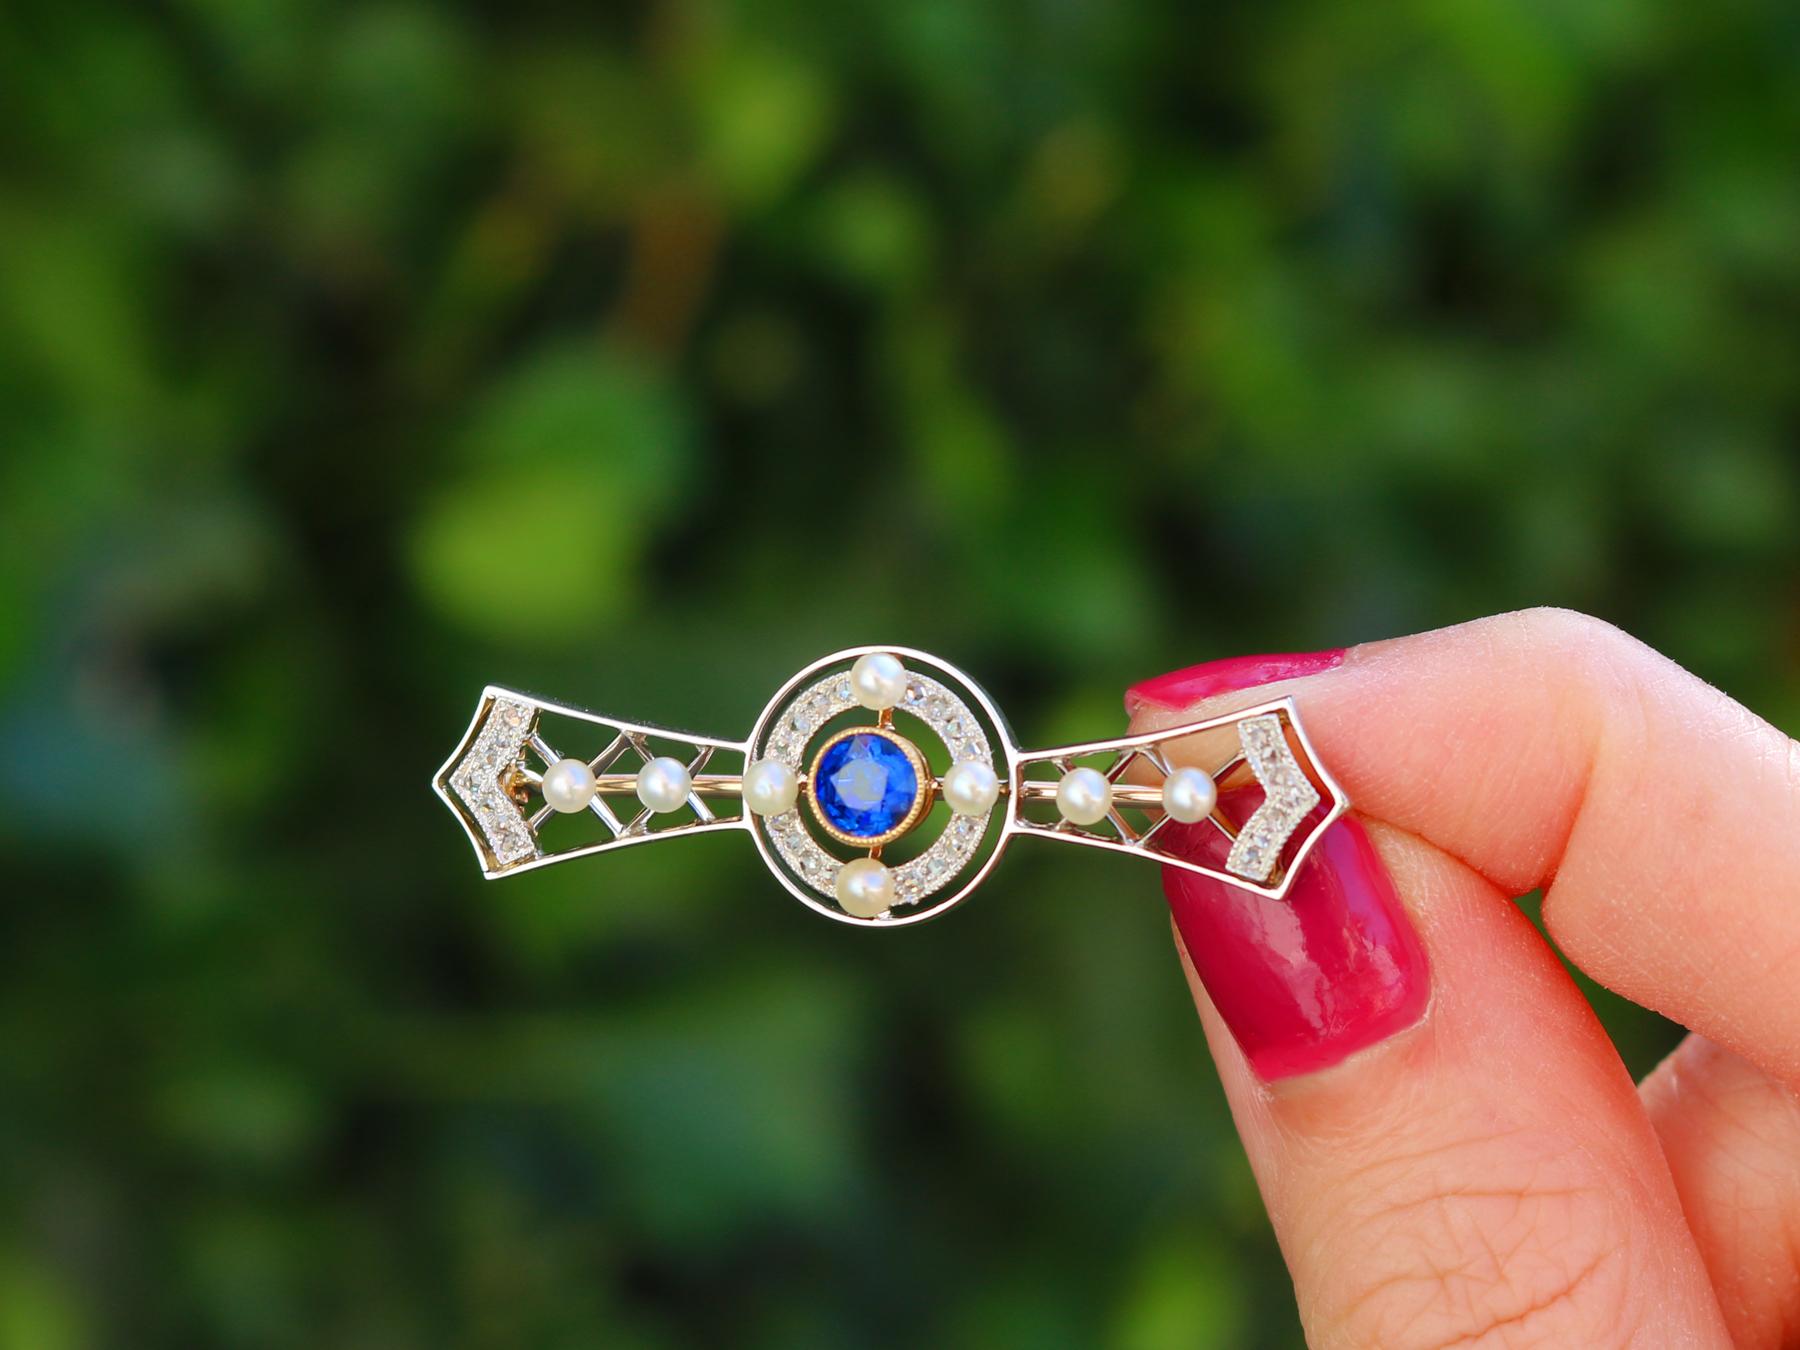 An exceptional, fine and impressive 0.64 carat sapphire, 0.20 carat diamond, seed pearl, 9 karat yellow gold and platinum brooch; part of our diverse antique jewelry and estate jewelry collections.

This exceptional, fine and impressive Edwardian